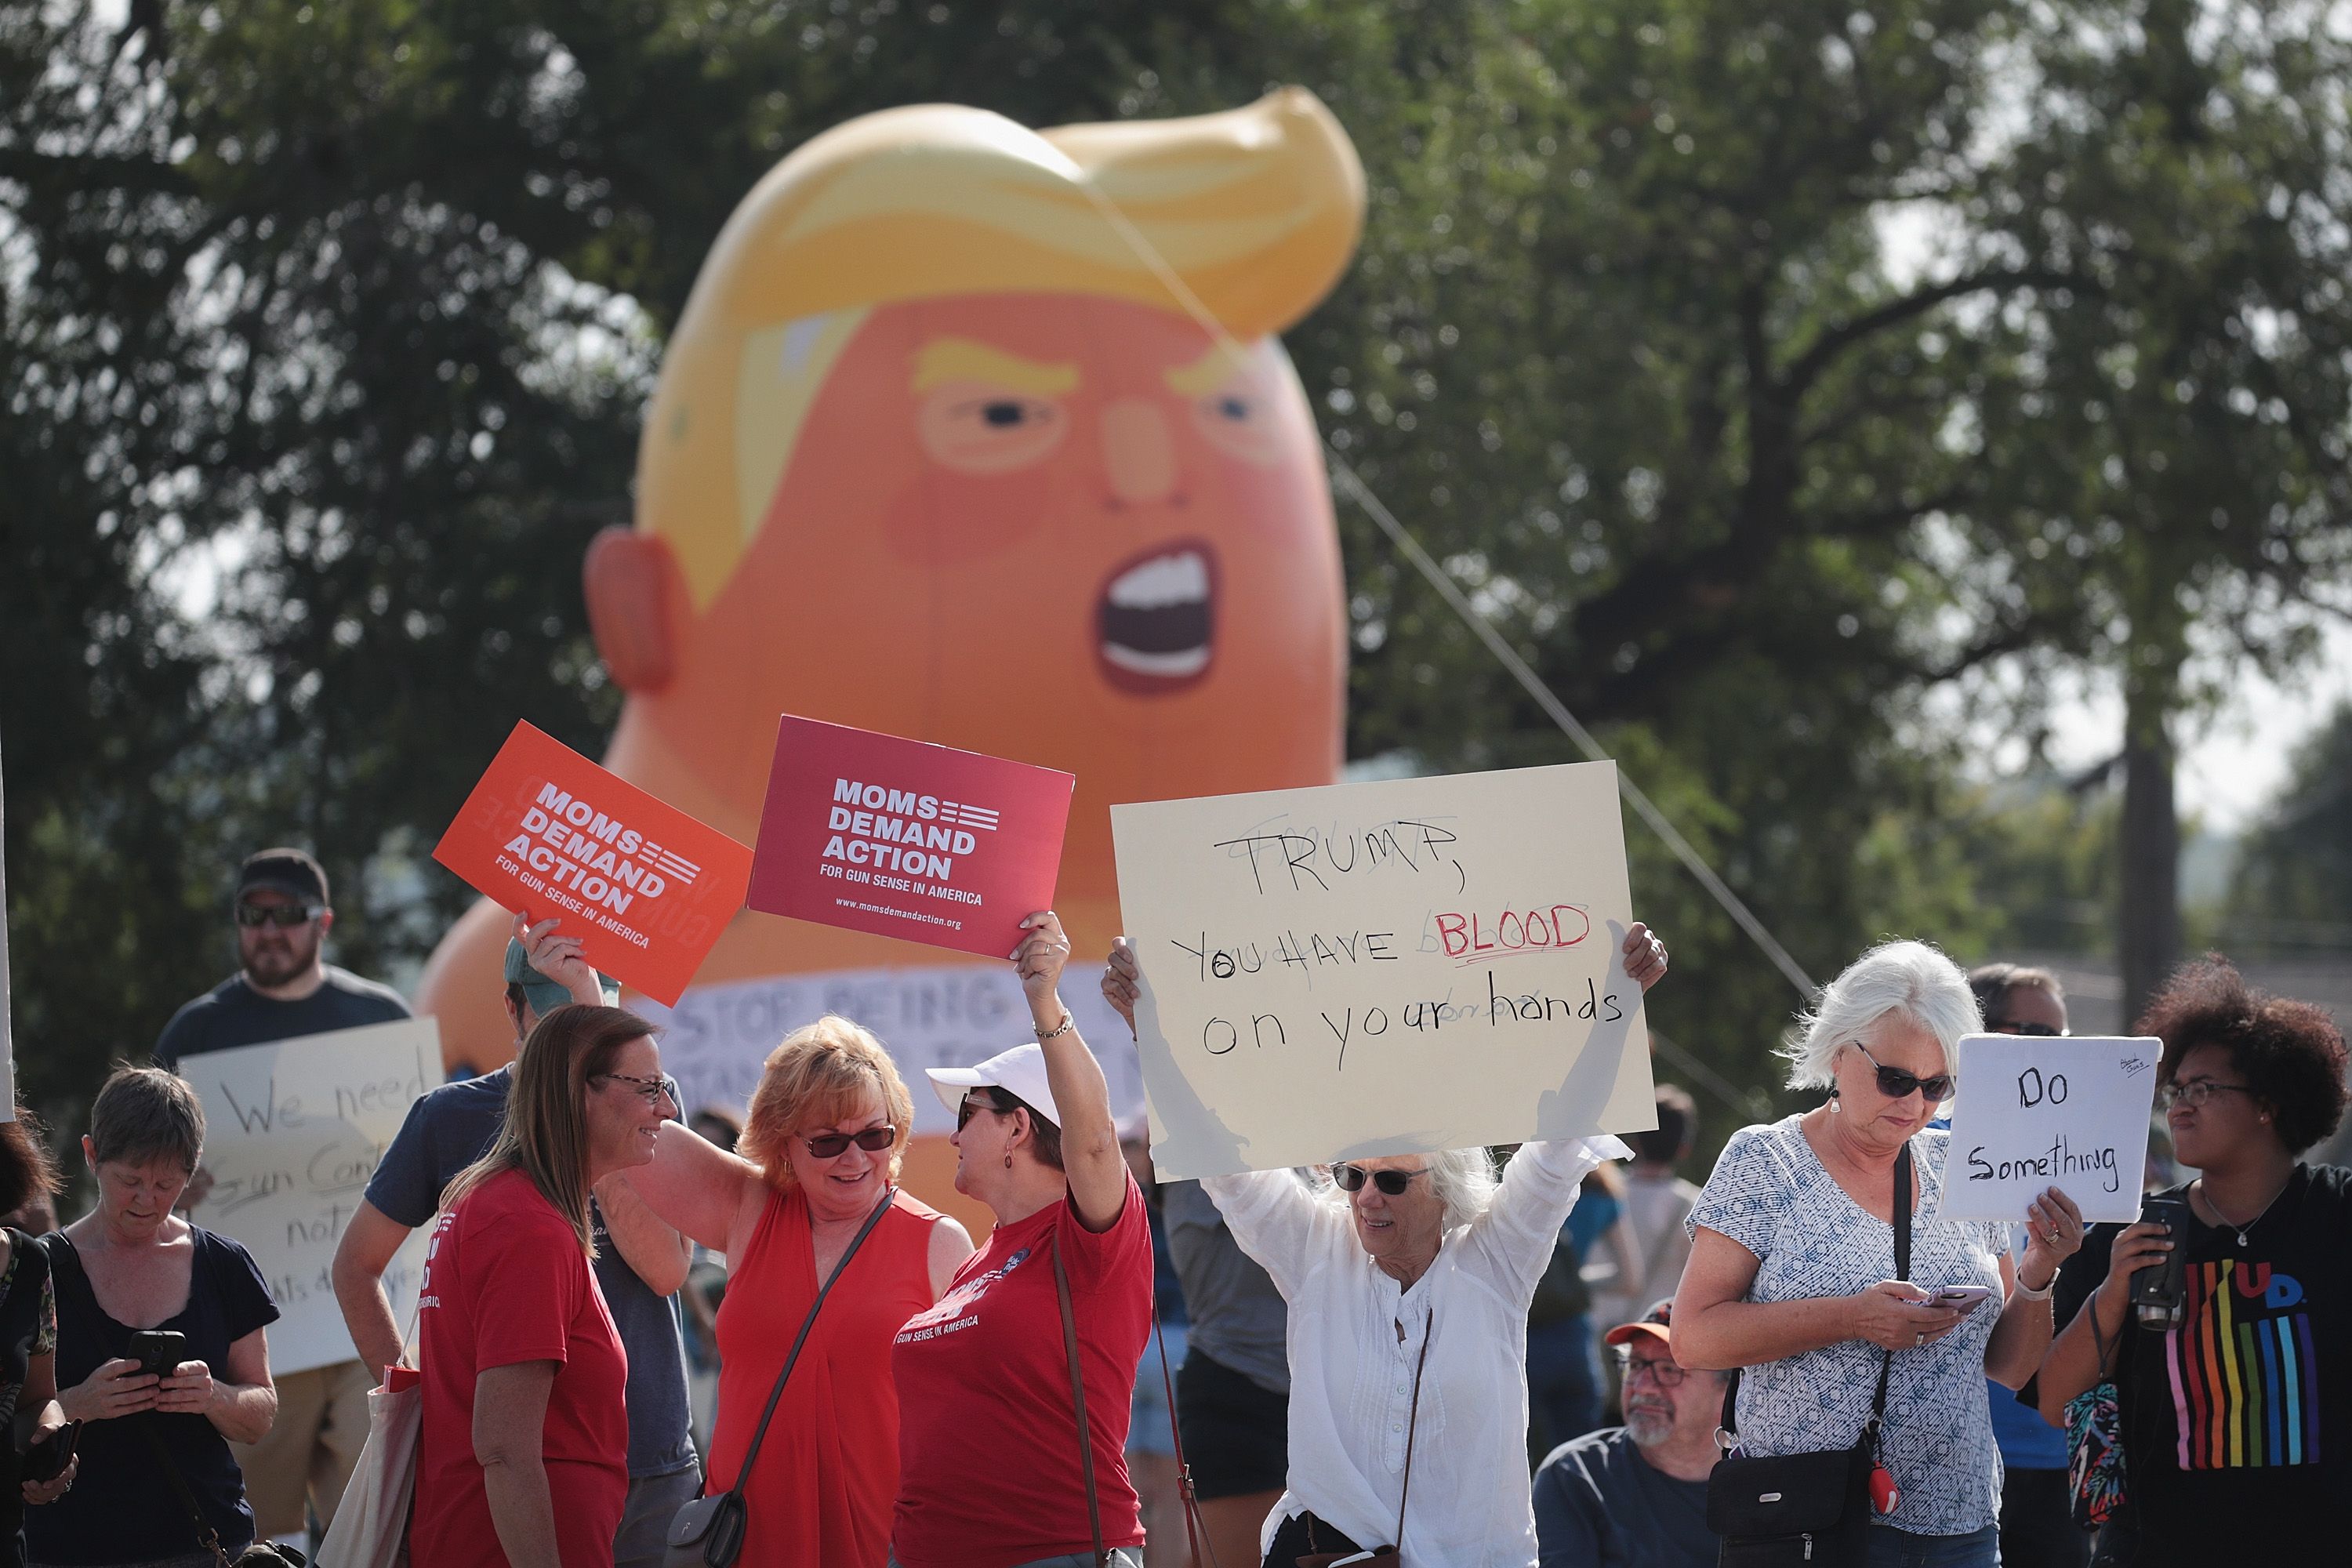 Demonstrators line the street near Miami Valley Hospital in anticipation of a visit from President Donald Trump